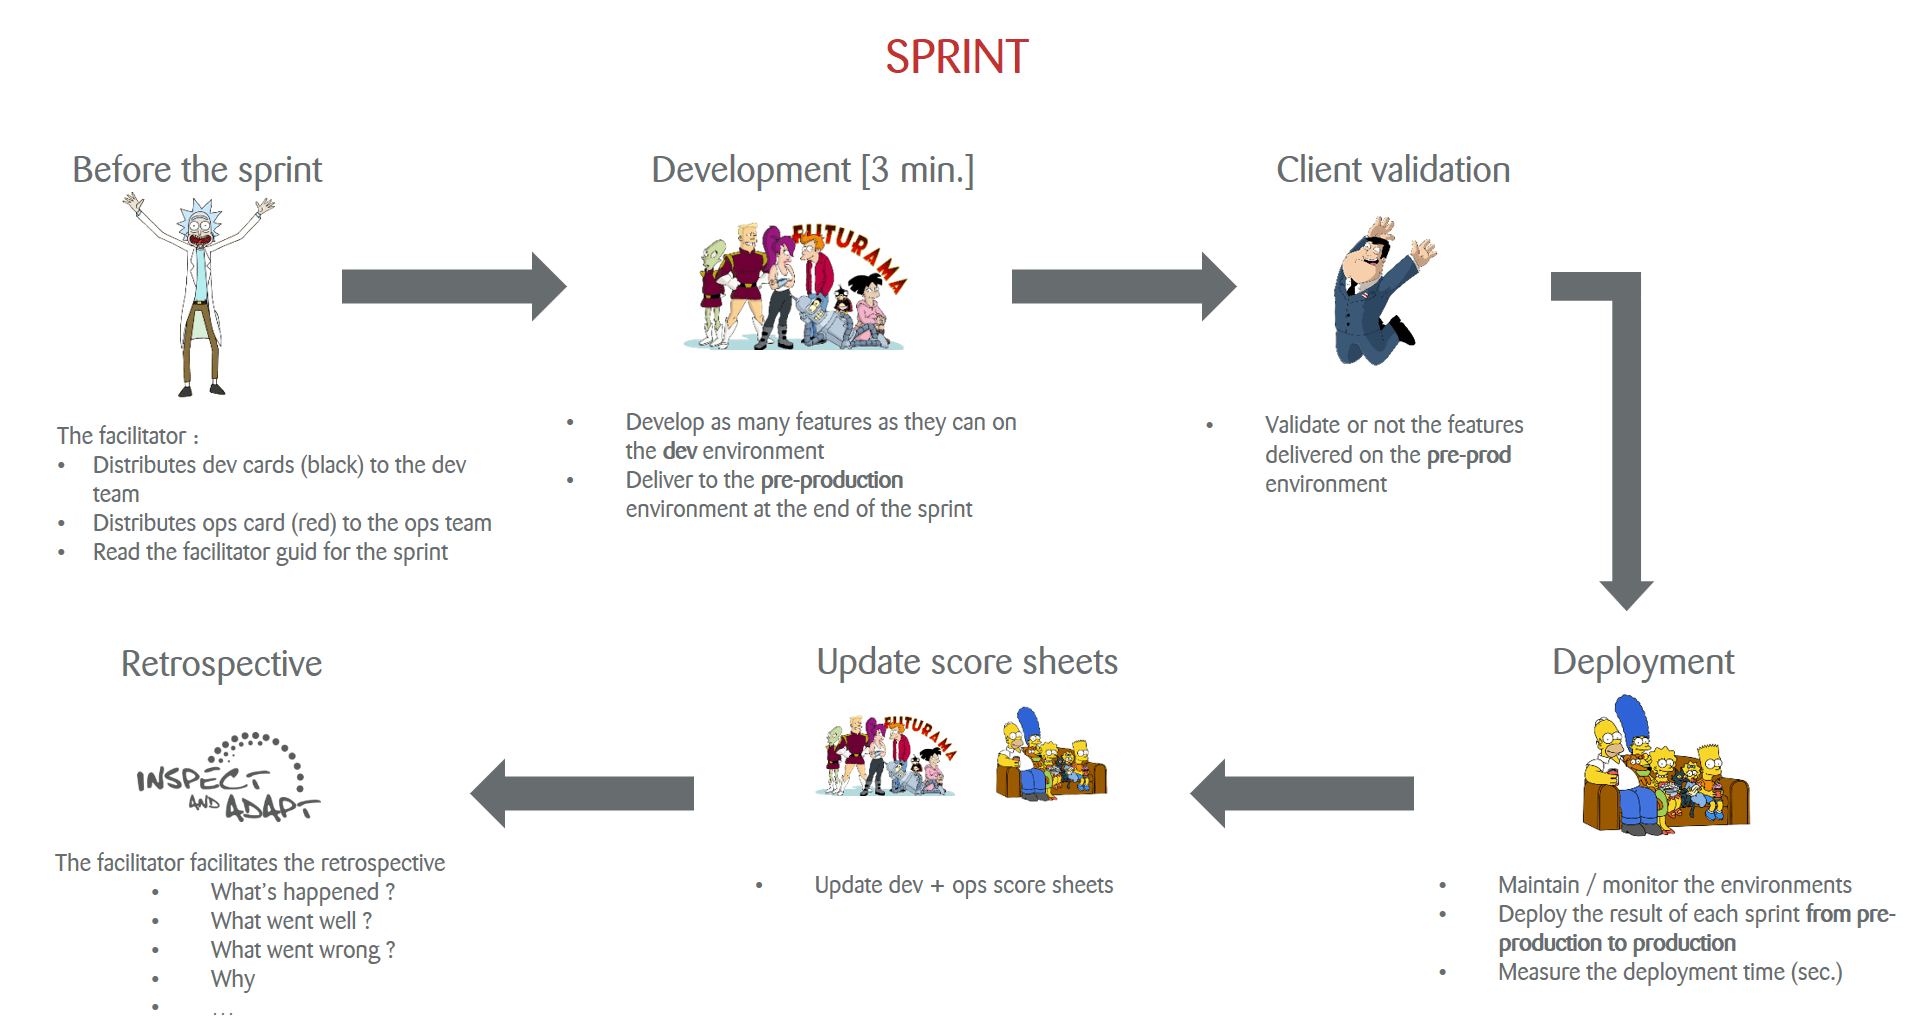 sprint.png